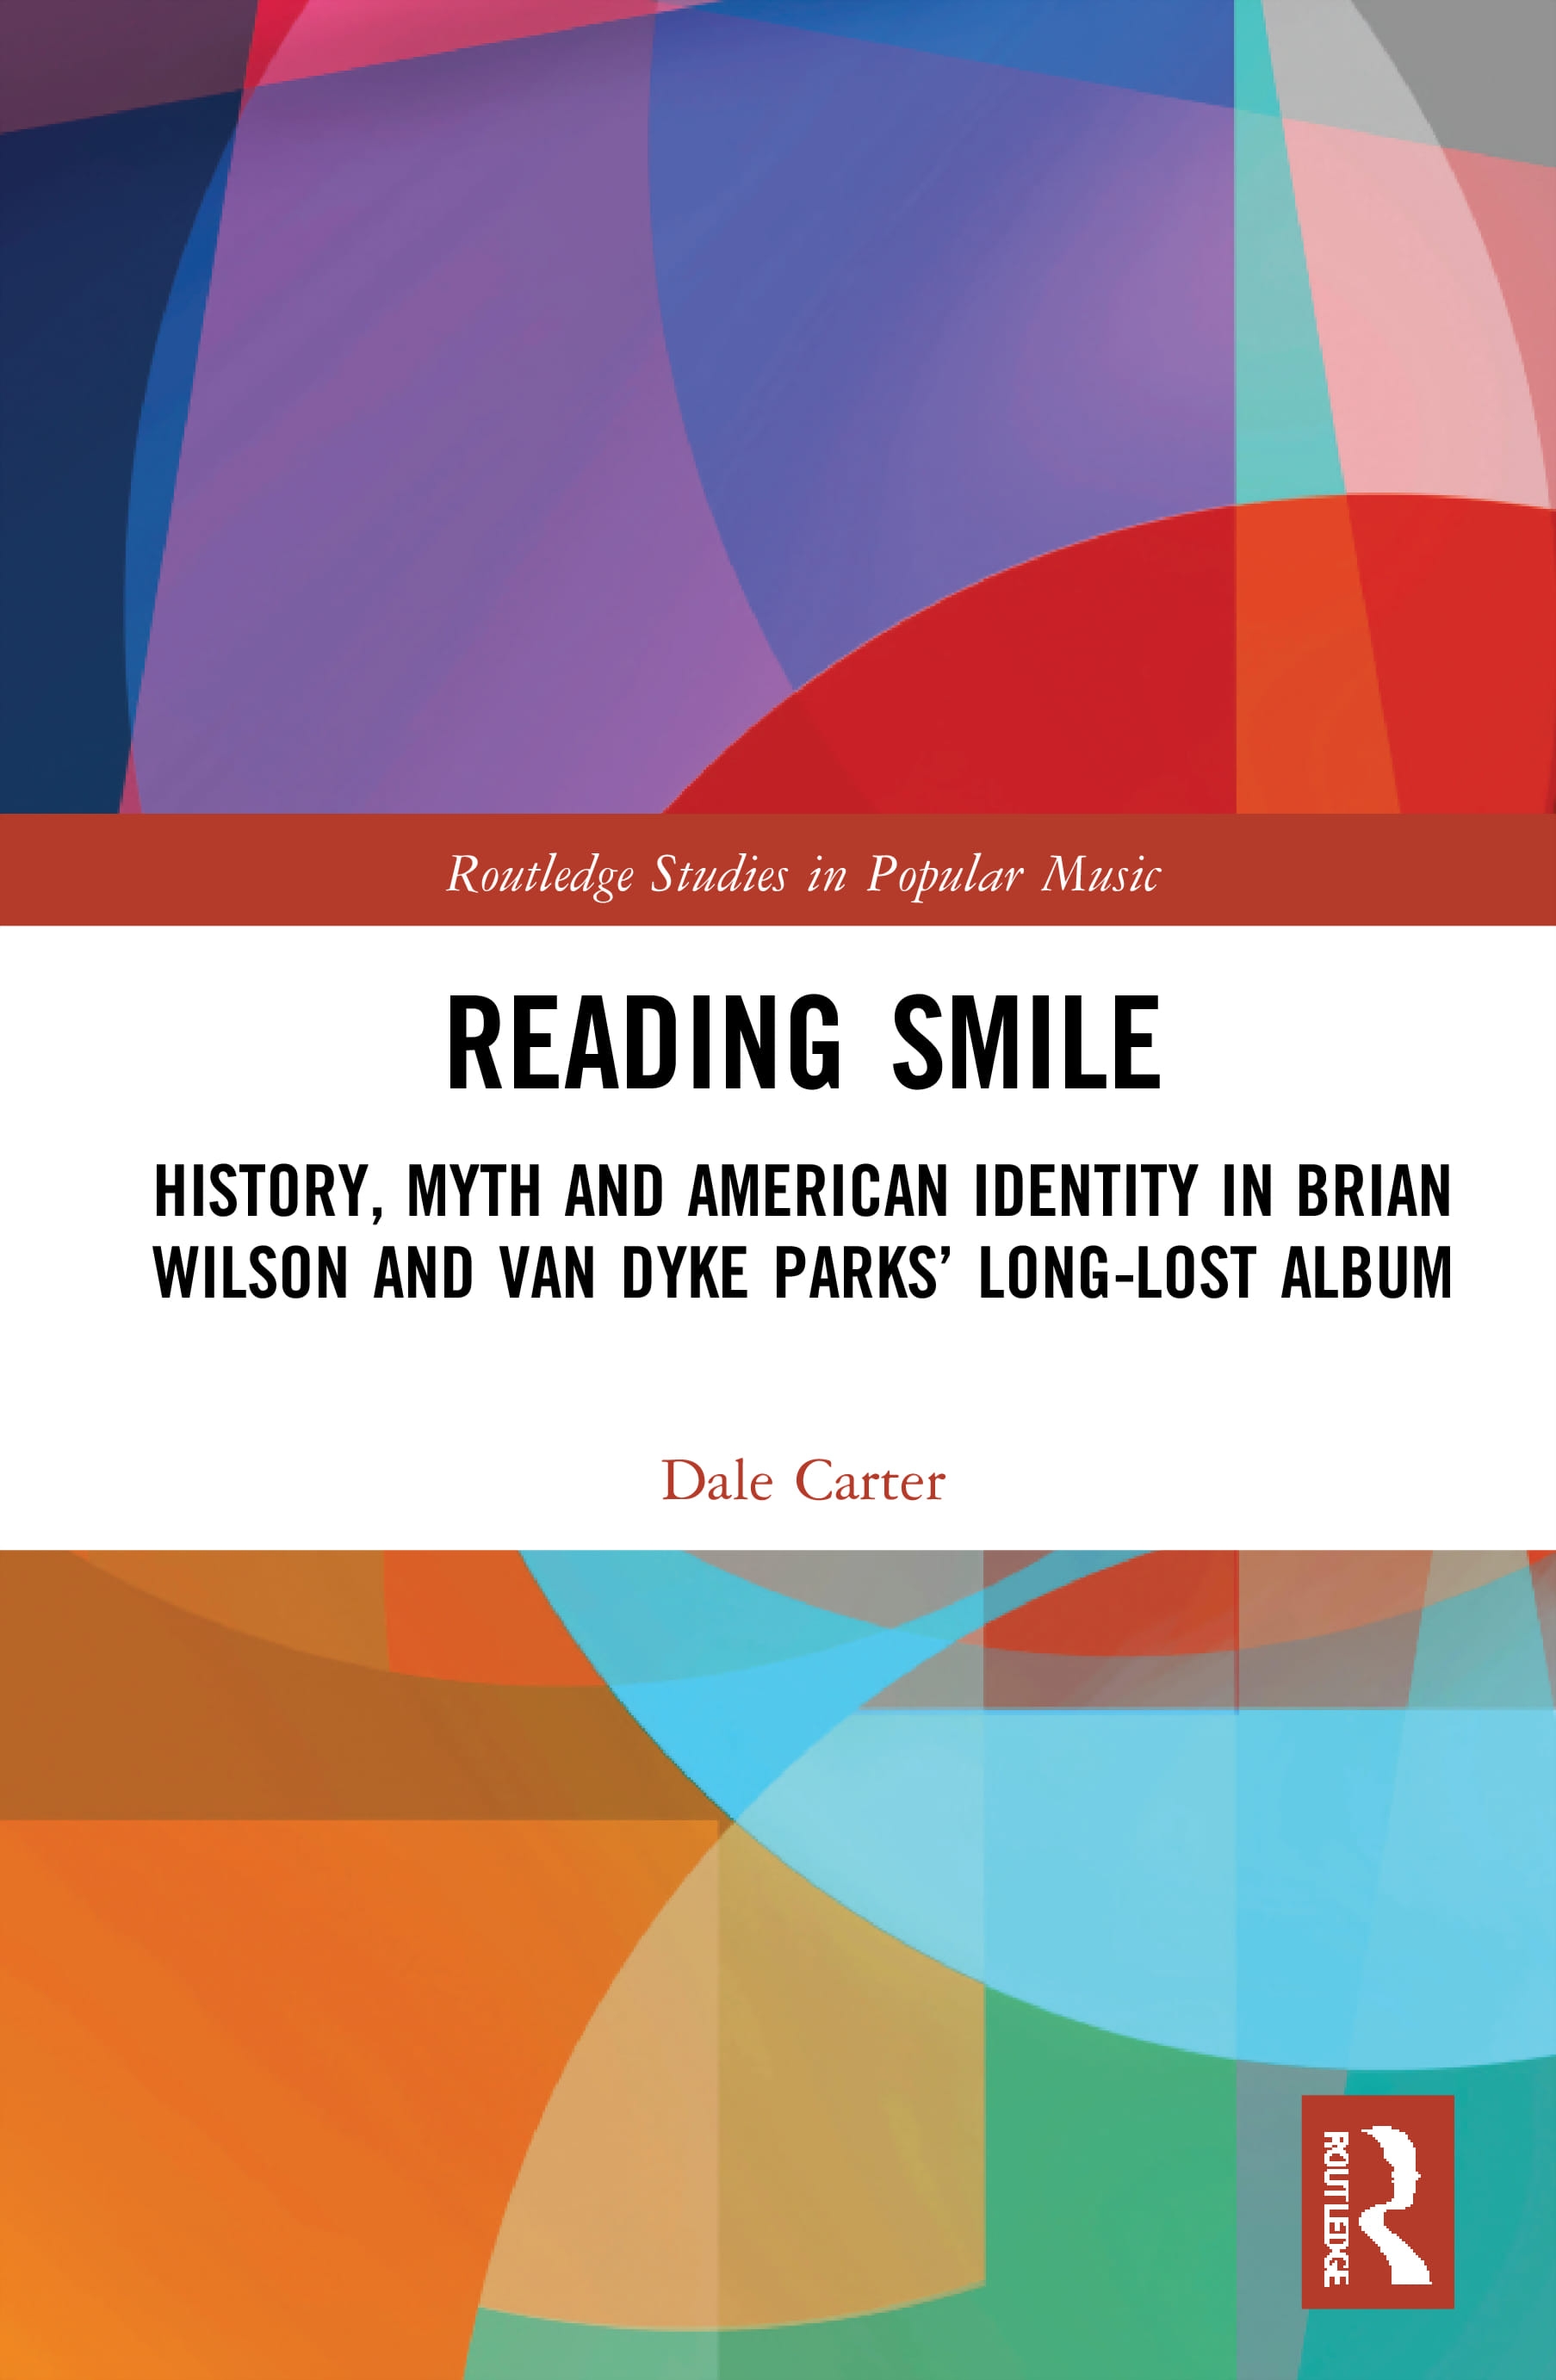 Reading Smile: History, Myth and American Identity in Brian Wilson and Van Dyke Parks’’ Long-Lost Album